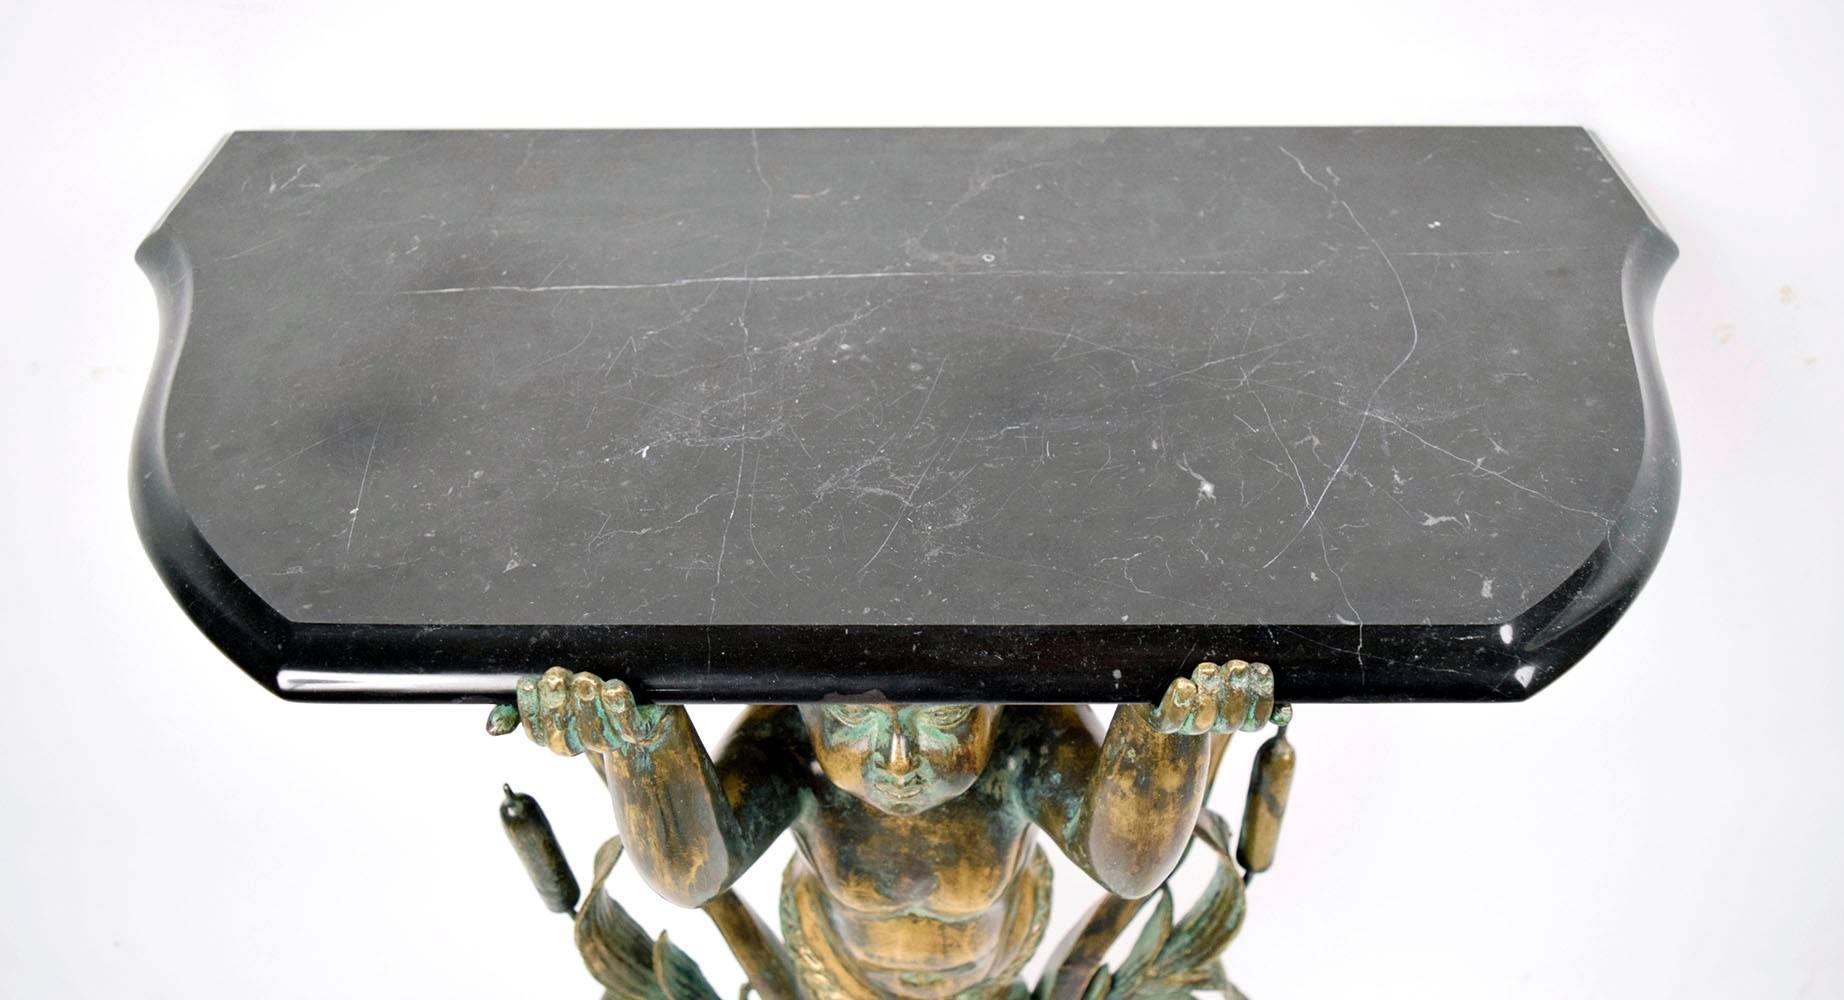 Pair of 1970s bronze side tables. Solid bronze statues, of an Cherub with Cattails on the sides and scrolls on the top holding a beveled black marble-top. Elegant bronze color with amazing patina, on a double circular marble base. Both side table